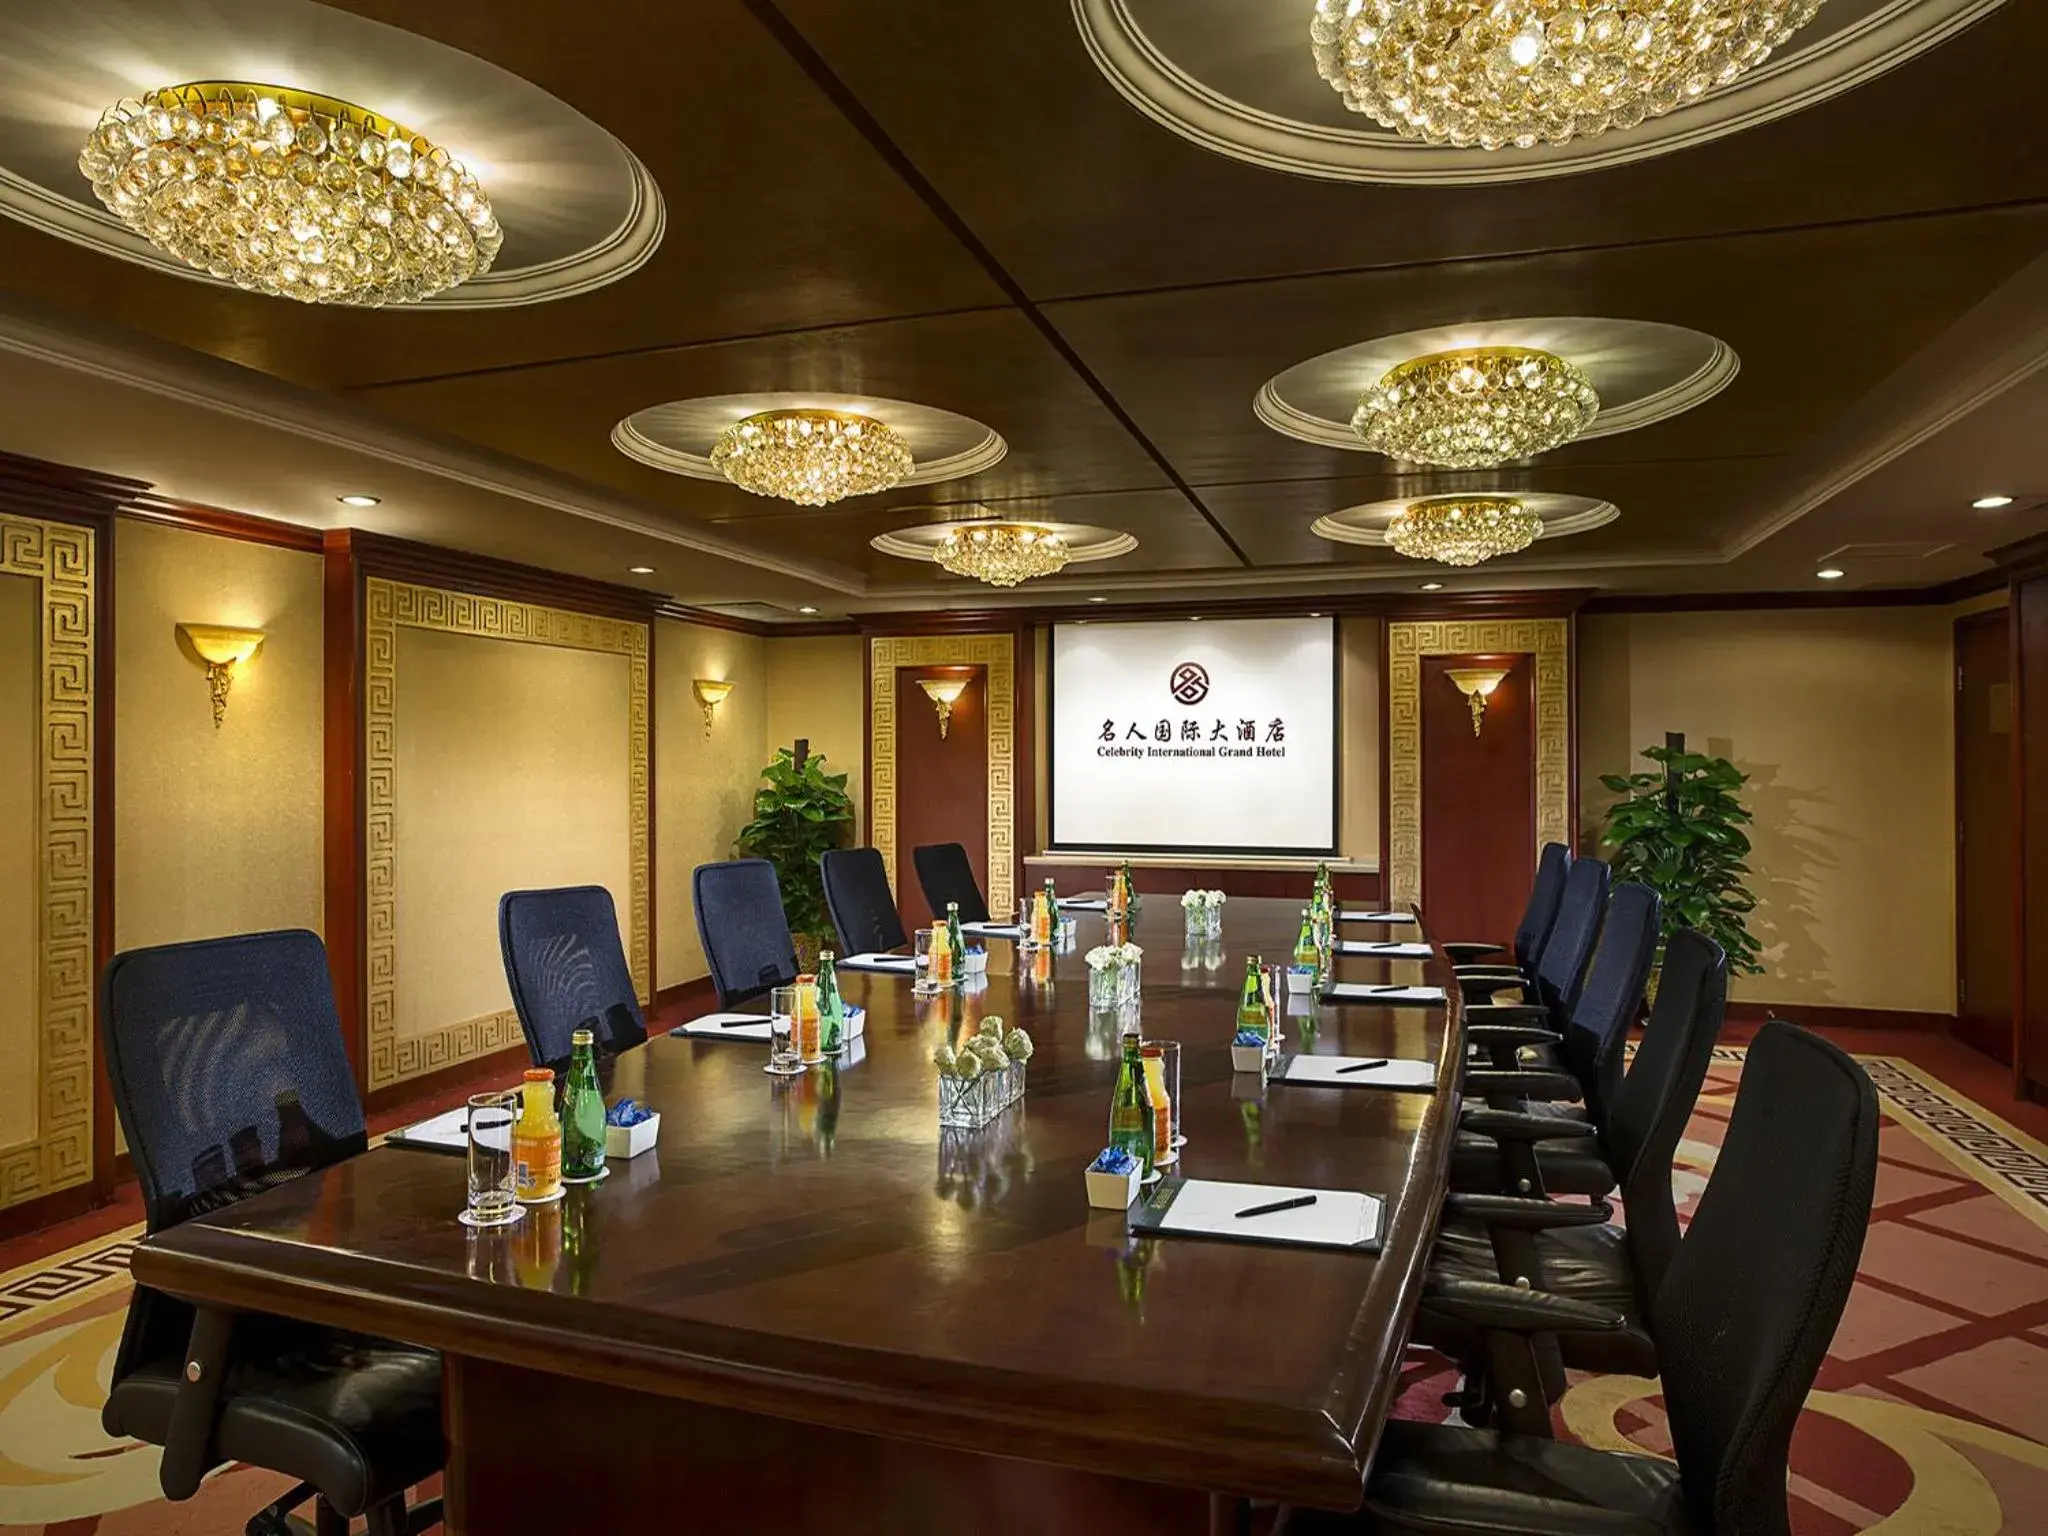 Business facilities in Celebrity International Grand Hotel